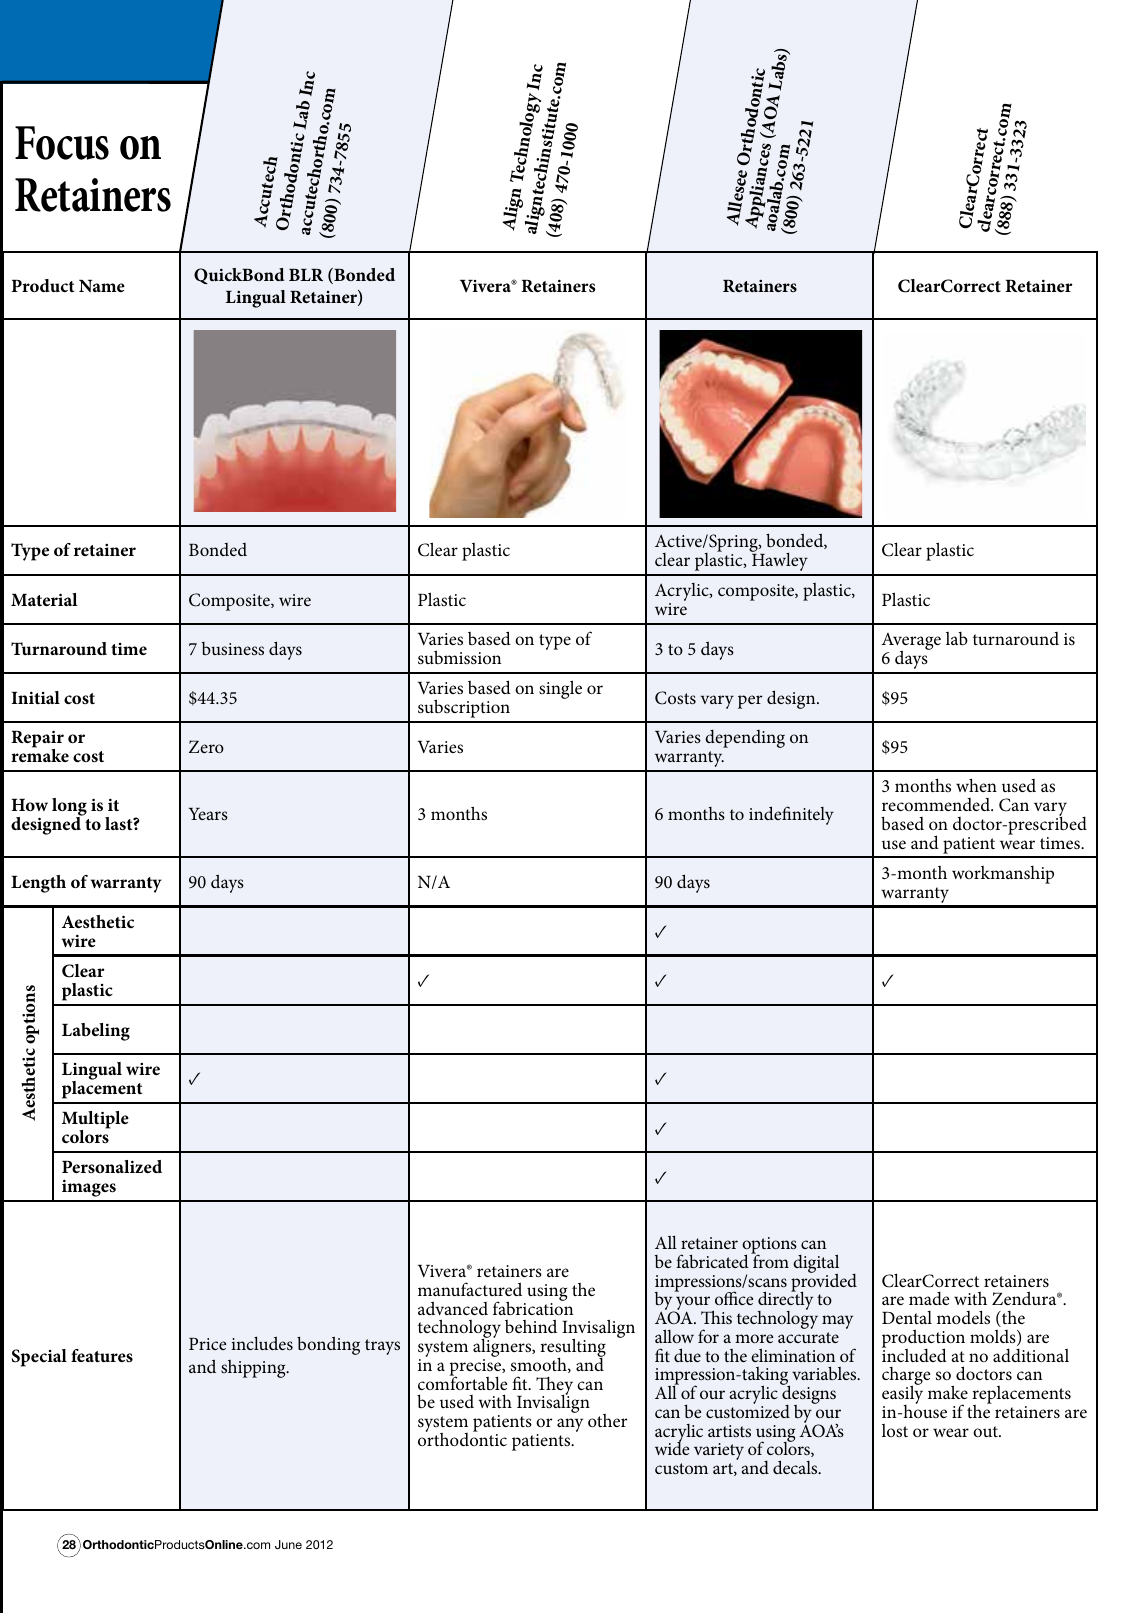 Page 1 of 6 - Images Editorial Orthodontic-products Pdf OP Focus Retainers June2012